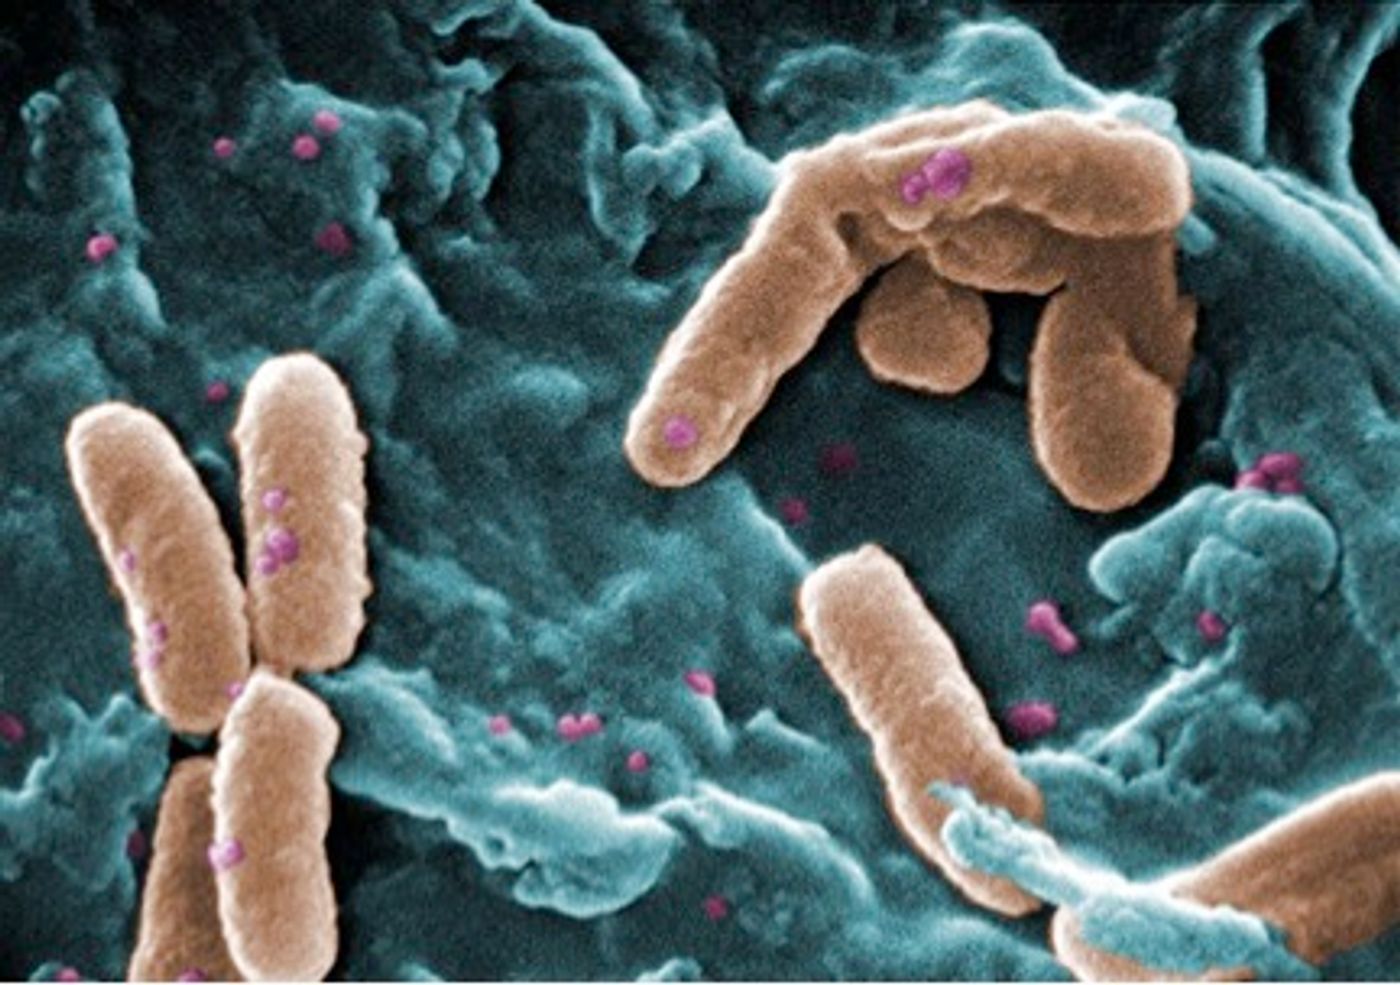 Pseudomonas aeruginosa, a bacteria that commonly infects chronic wounds